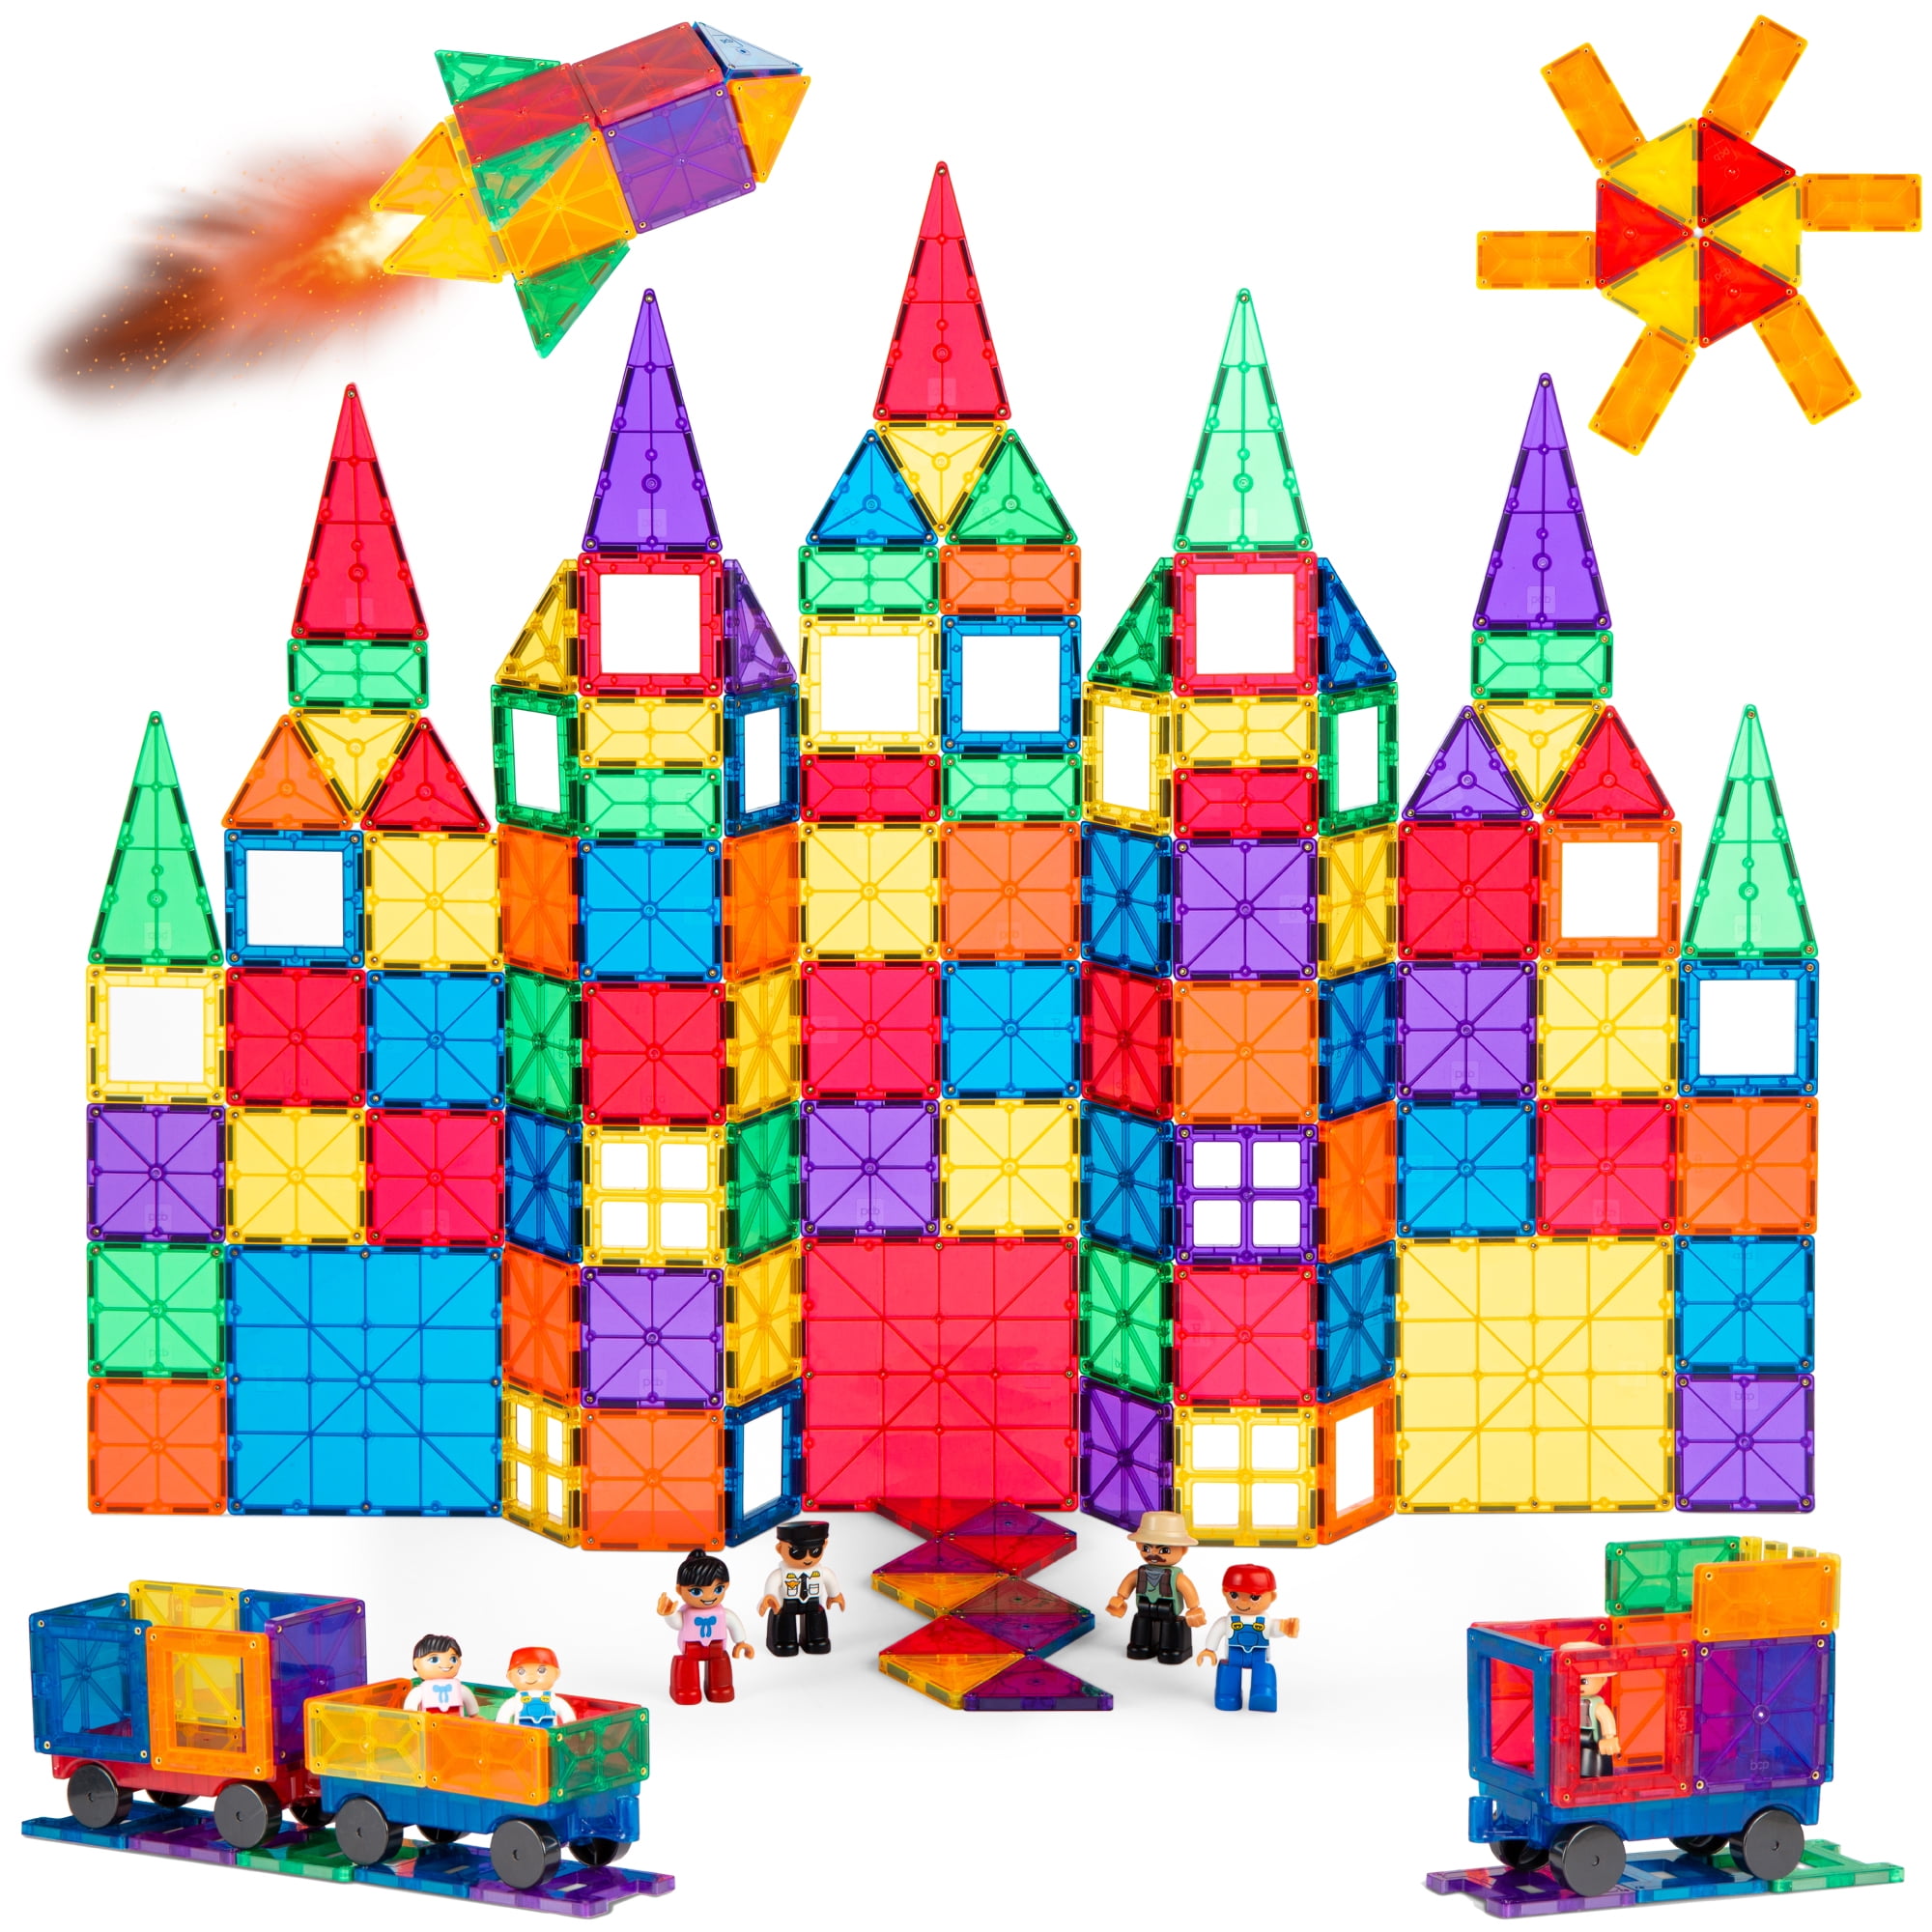 Kids Magnet Toys Magnetic Tiles 148PCS 3D Magnetic Building Blocks STEM Learning Toys Magnetic Toys for 3 4 5 6 7 Years Old Boys Girls Gifts with 2 Cars